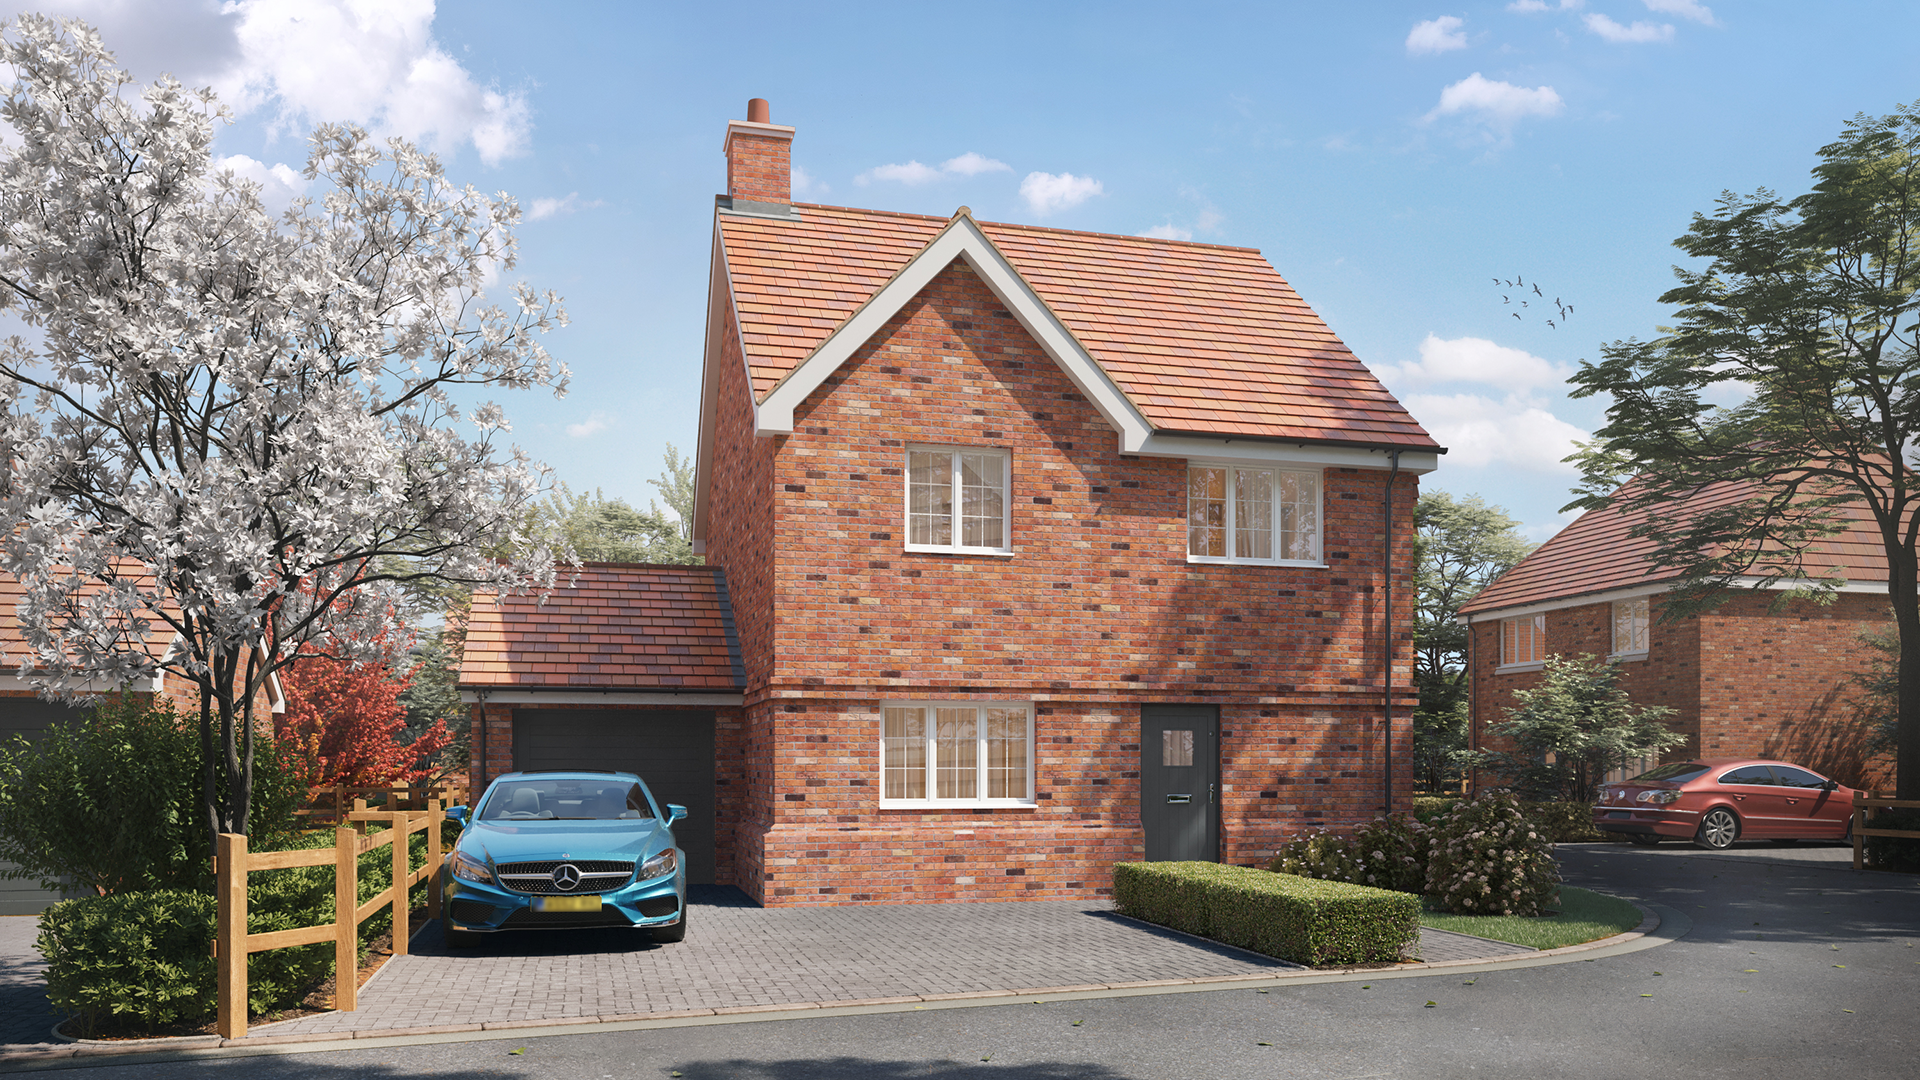 CGI of detached brick house with garage, blue car on drive, and hedge